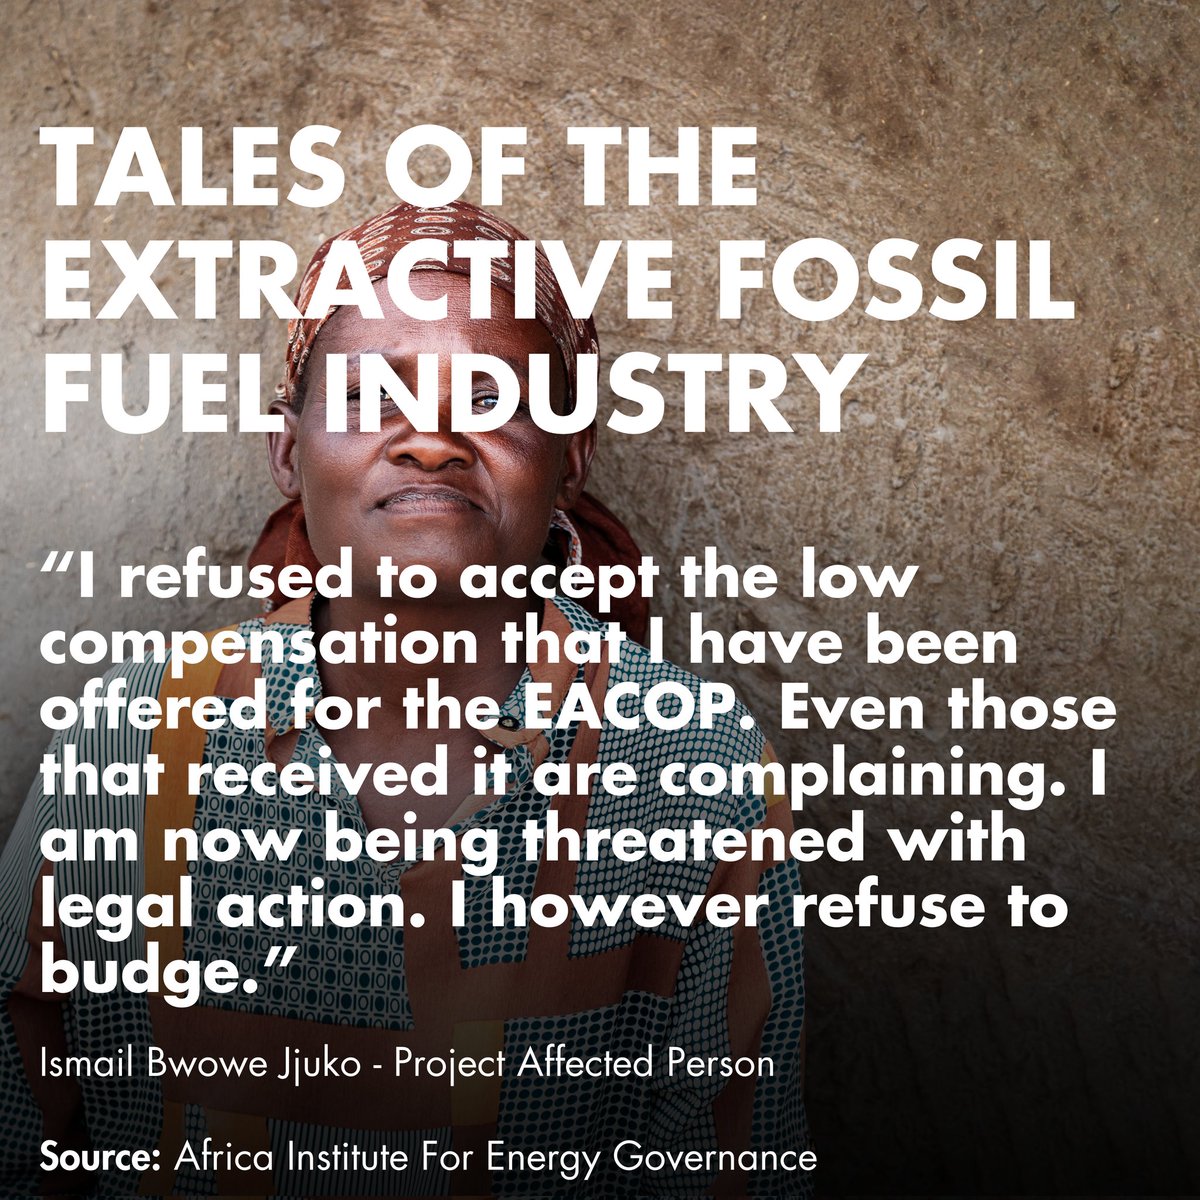 📢 As @TotalEnergies celebrates 100 years of #FossilFuel extraction. Many stories of affected communities keep coming to light of the caos that they cause to peoples livelihoods. #CenturyOfClimateChaos #STOPTOTAL #EndFossilFuels @totalenergies_fr @europarl_en